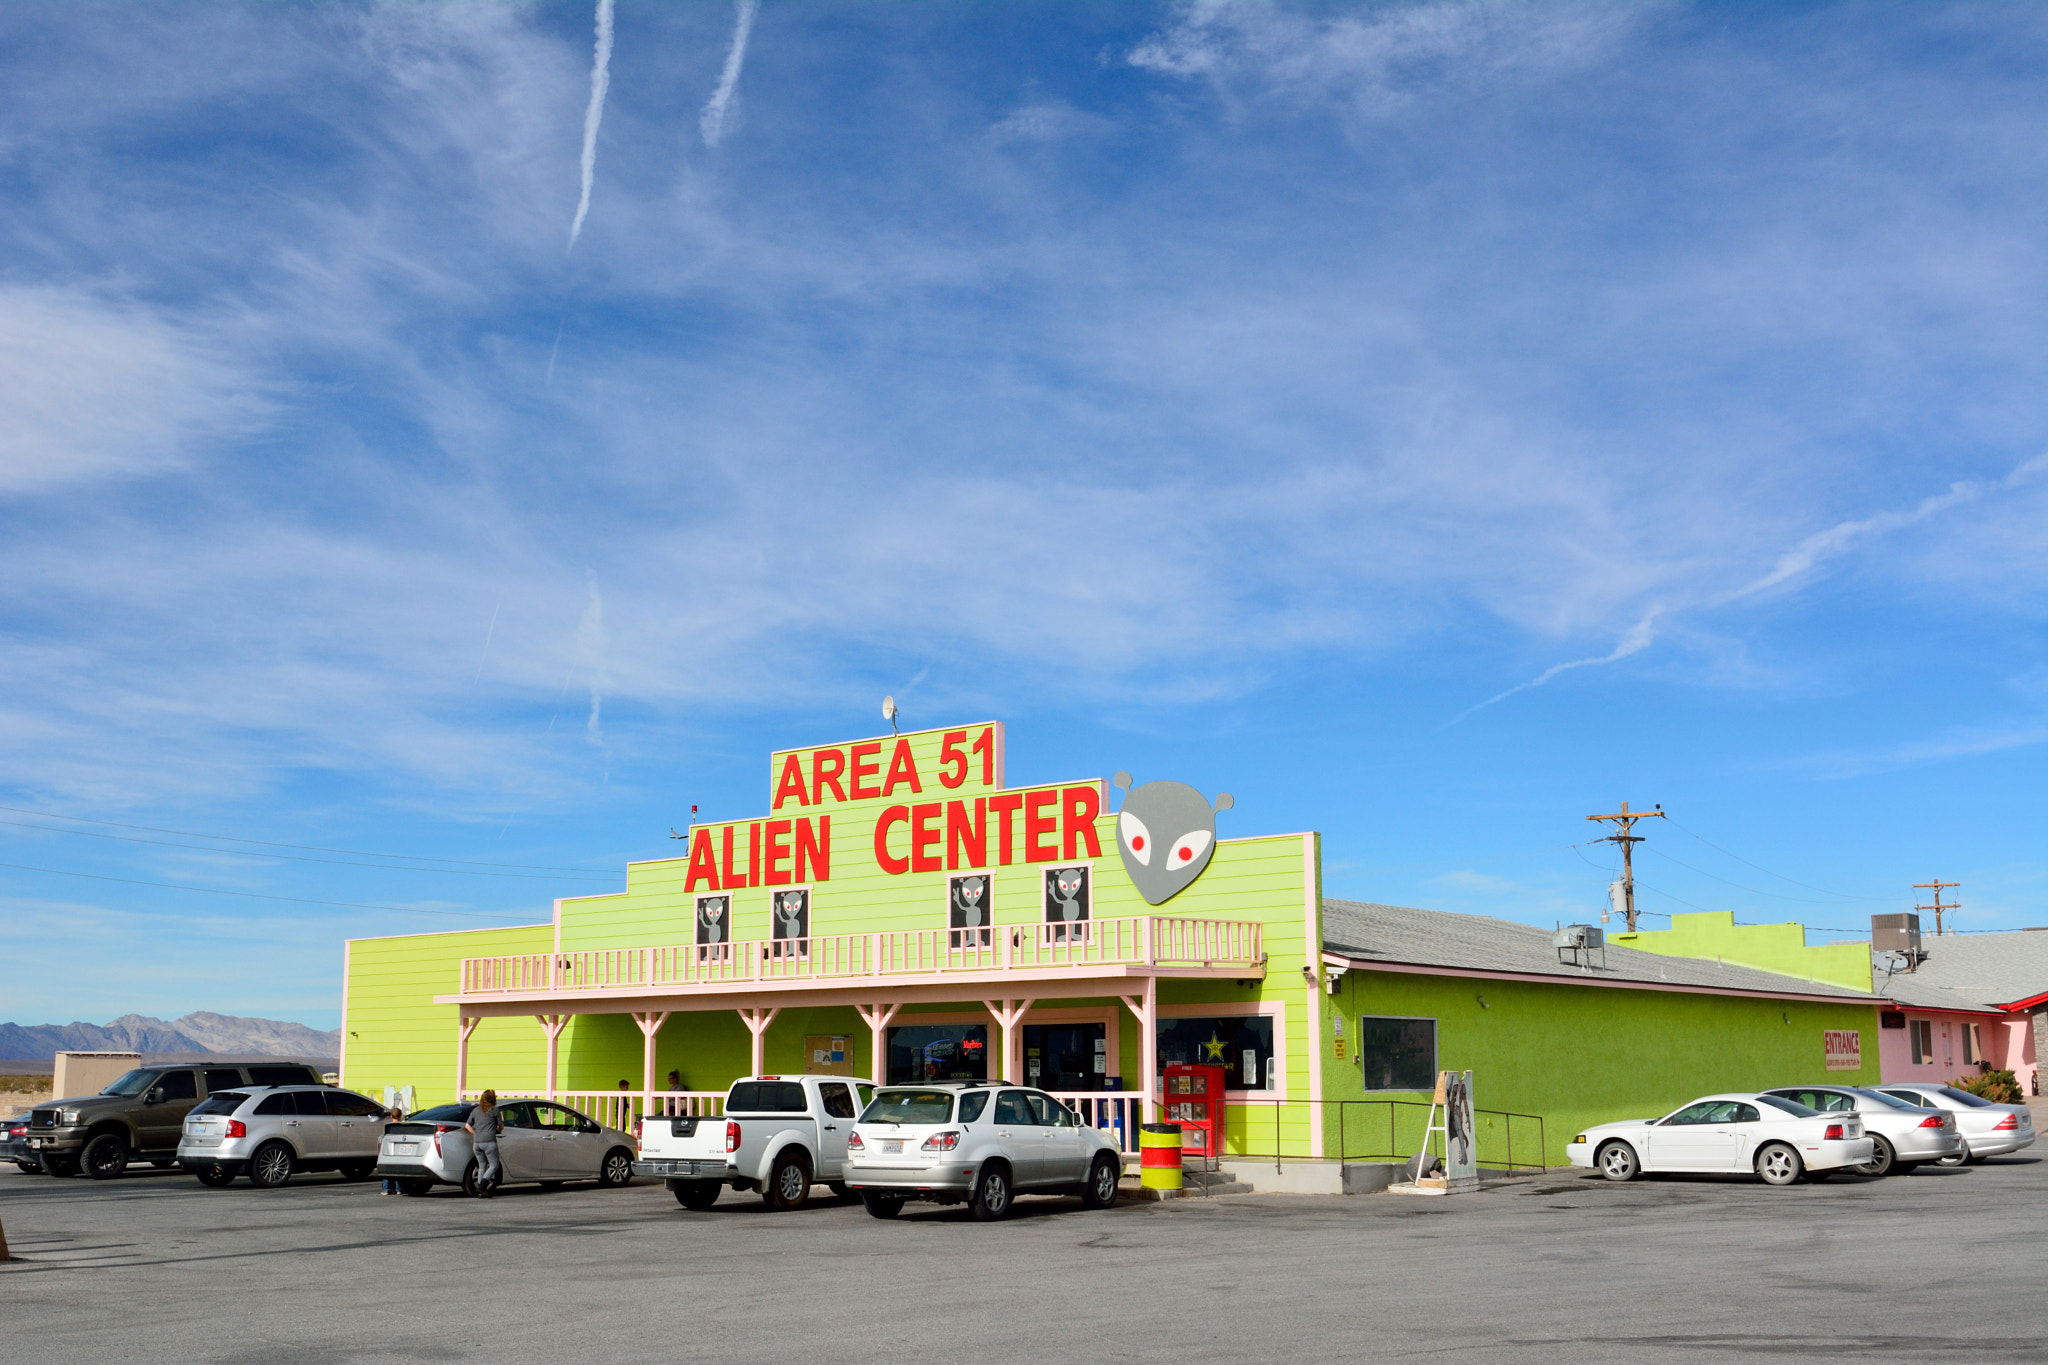 Exterior view of Area 51 Alien Center in Amargosa Valley, with c